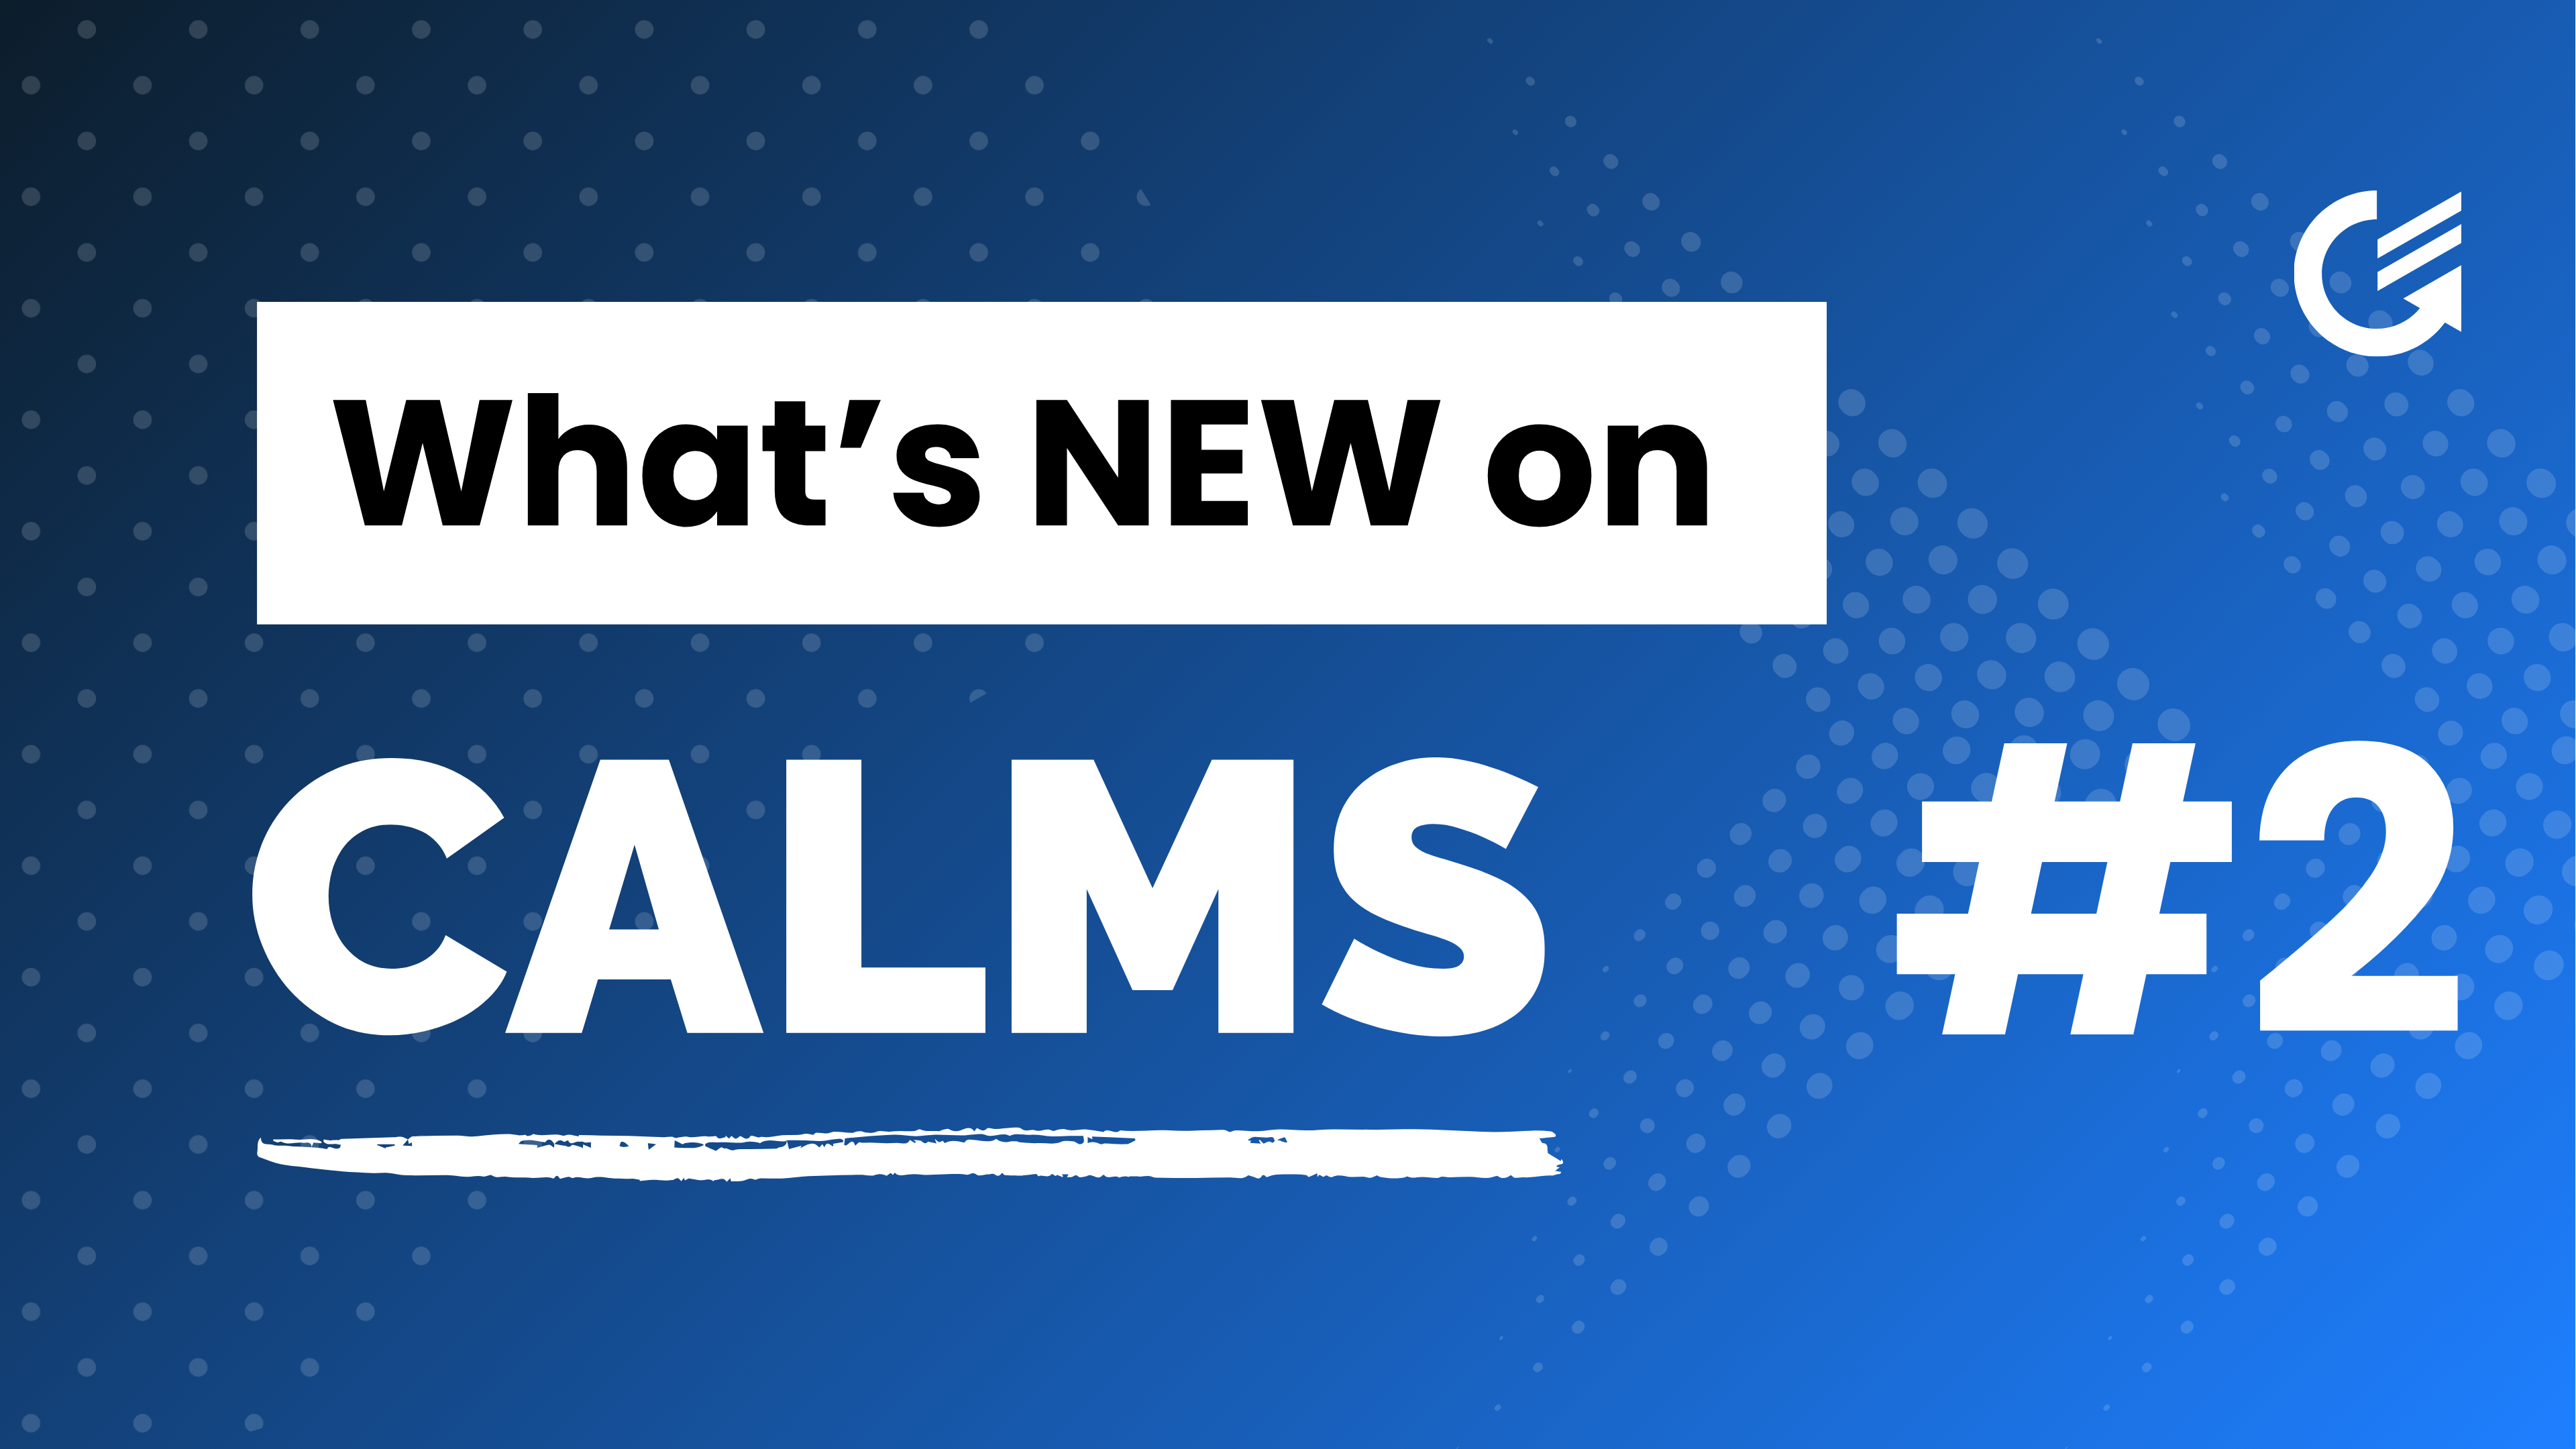 CALMS Application - New Features #2